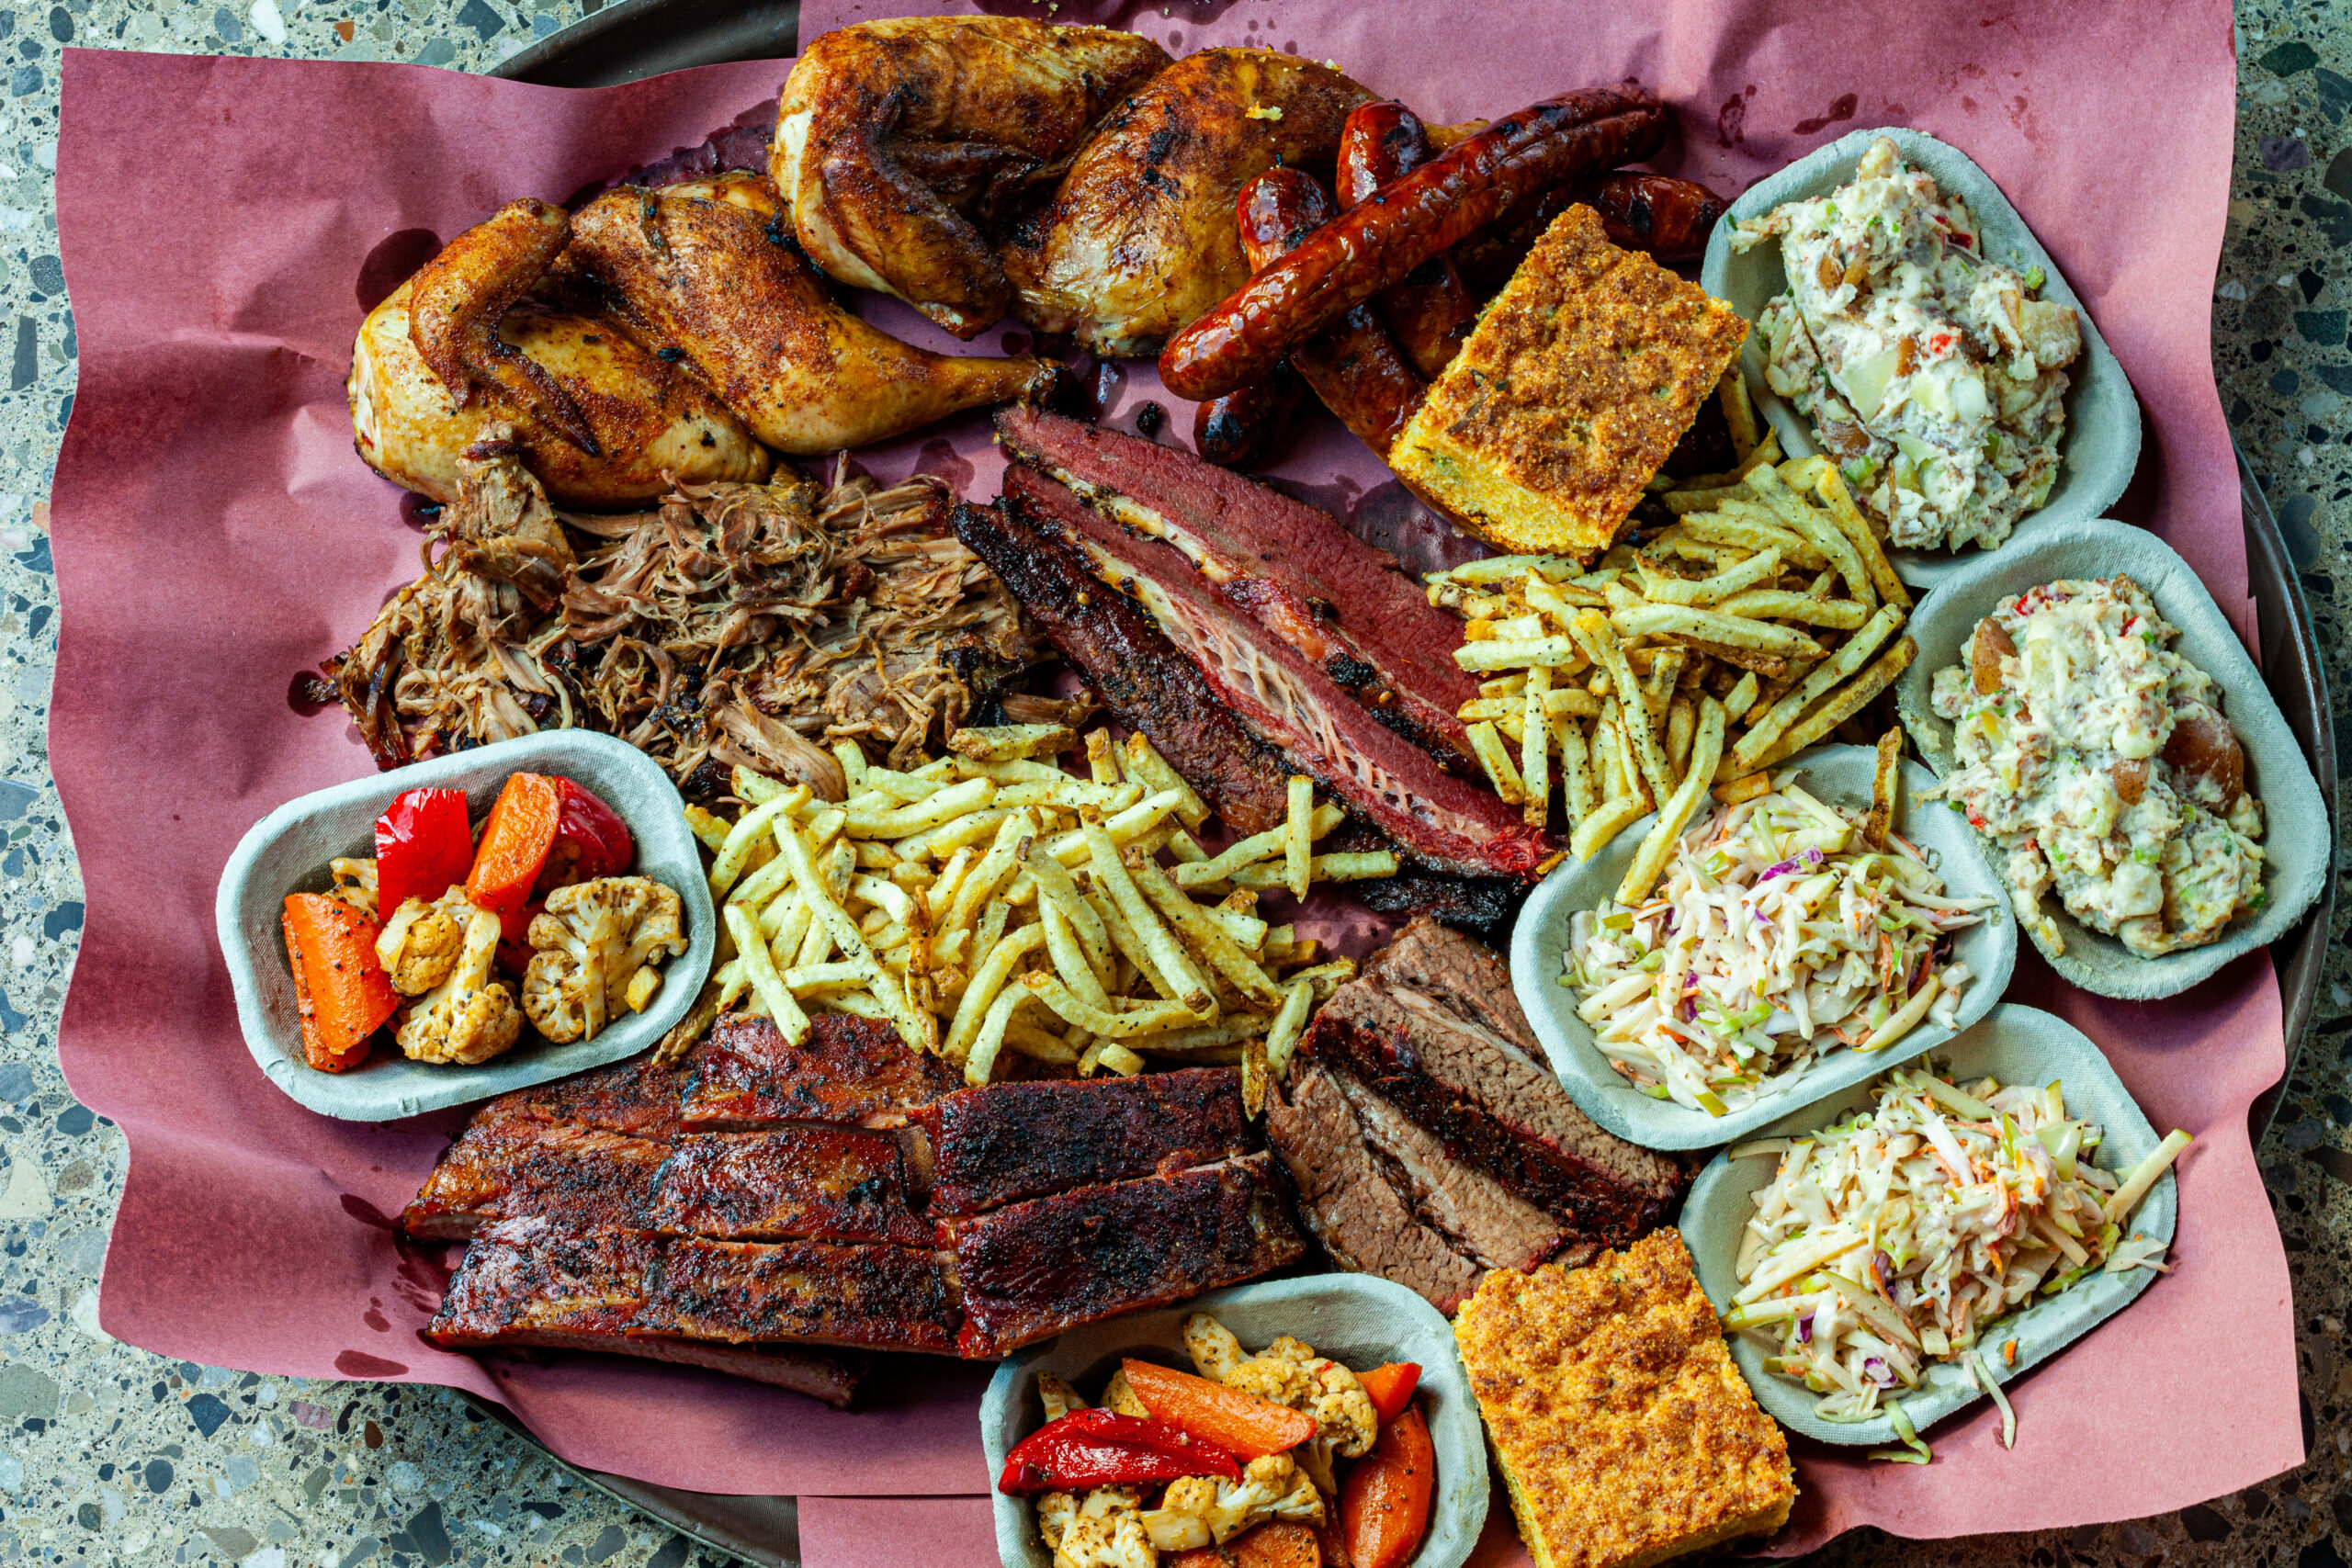 A huge platter full of Prairie Dog Brewing's signature BBQ combo The Fuller Pit featuring brisket, pastrami, pulled pork, pork side ribs, smoked chicken, chorizo sausages, fries, cornbread and sides.